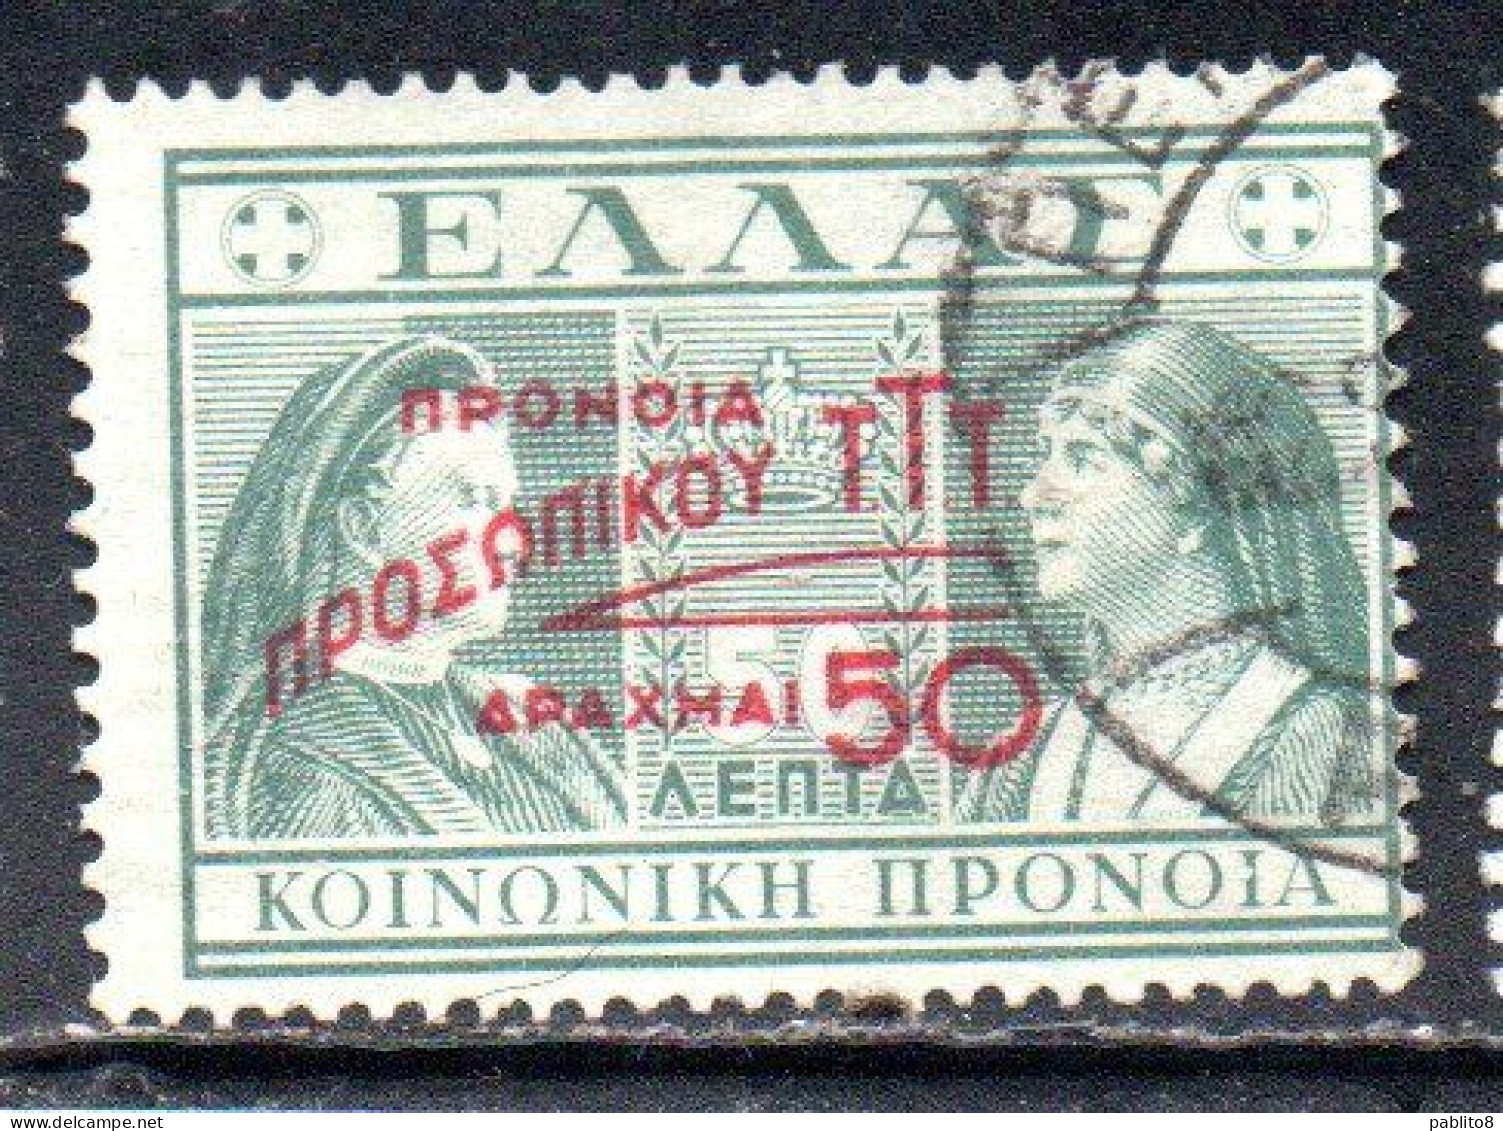 GREECE GRECIA ELLAS 1947 POSTAL TAX STAMPS TUBERCULOSIS SURCHARGED 50d On 50l USED USATO OBLITERE' - Fiscales